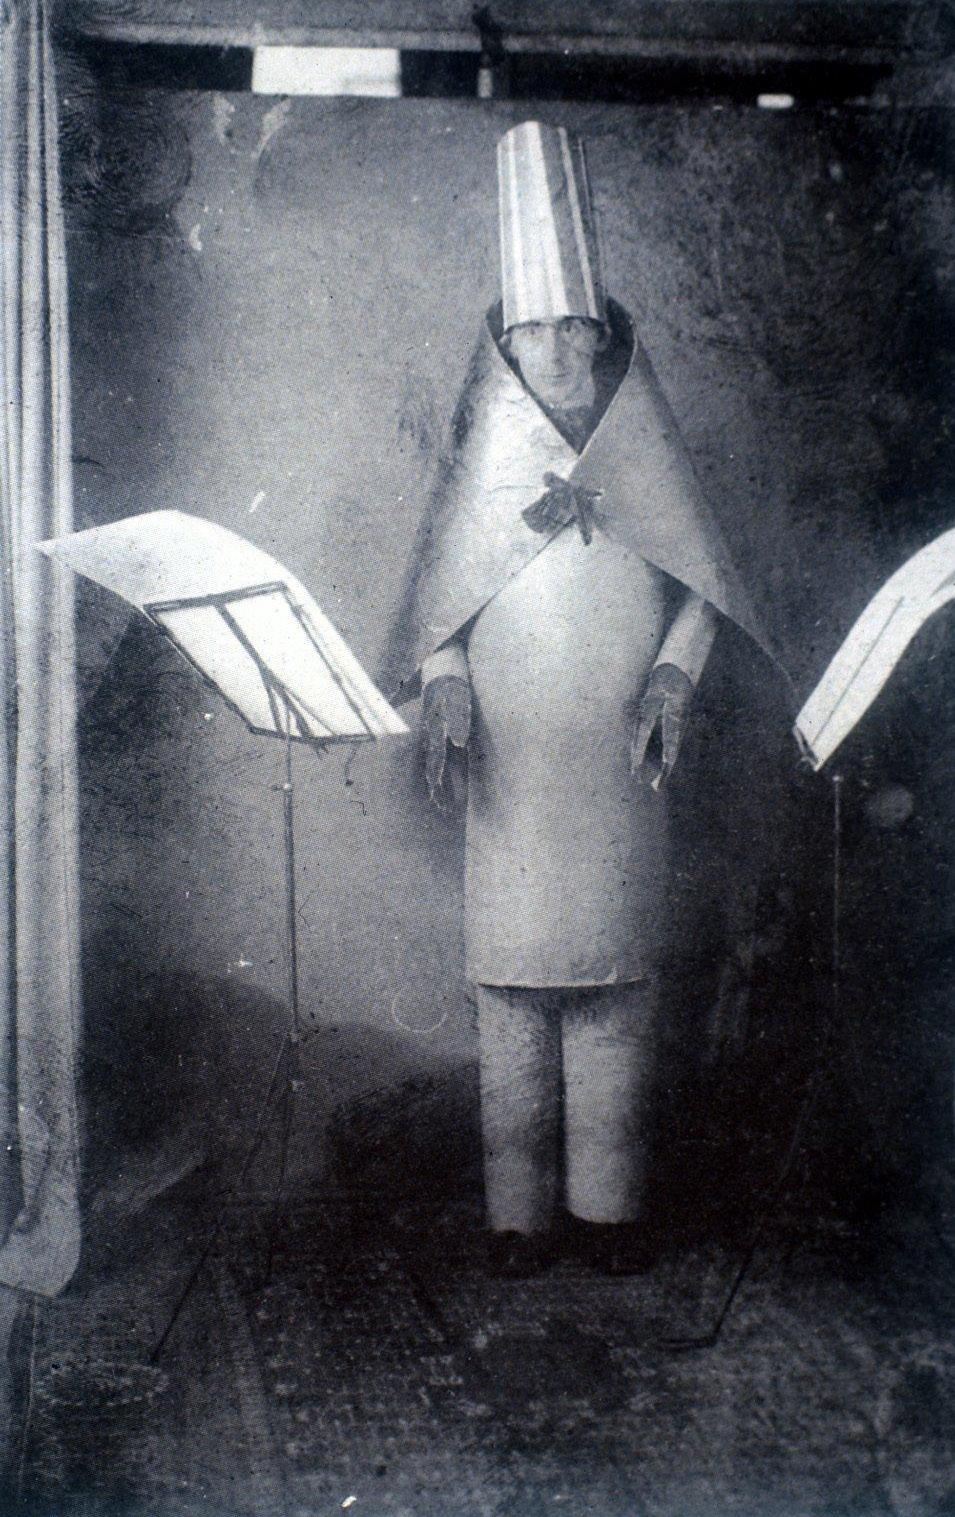 Hugo Ball Performing at Cabaret Voltaire (1916) Artwork description & Analysis: Ball designed this costume for his performance of the sound-poem, Karawane, in which nonsensical syllables uttered